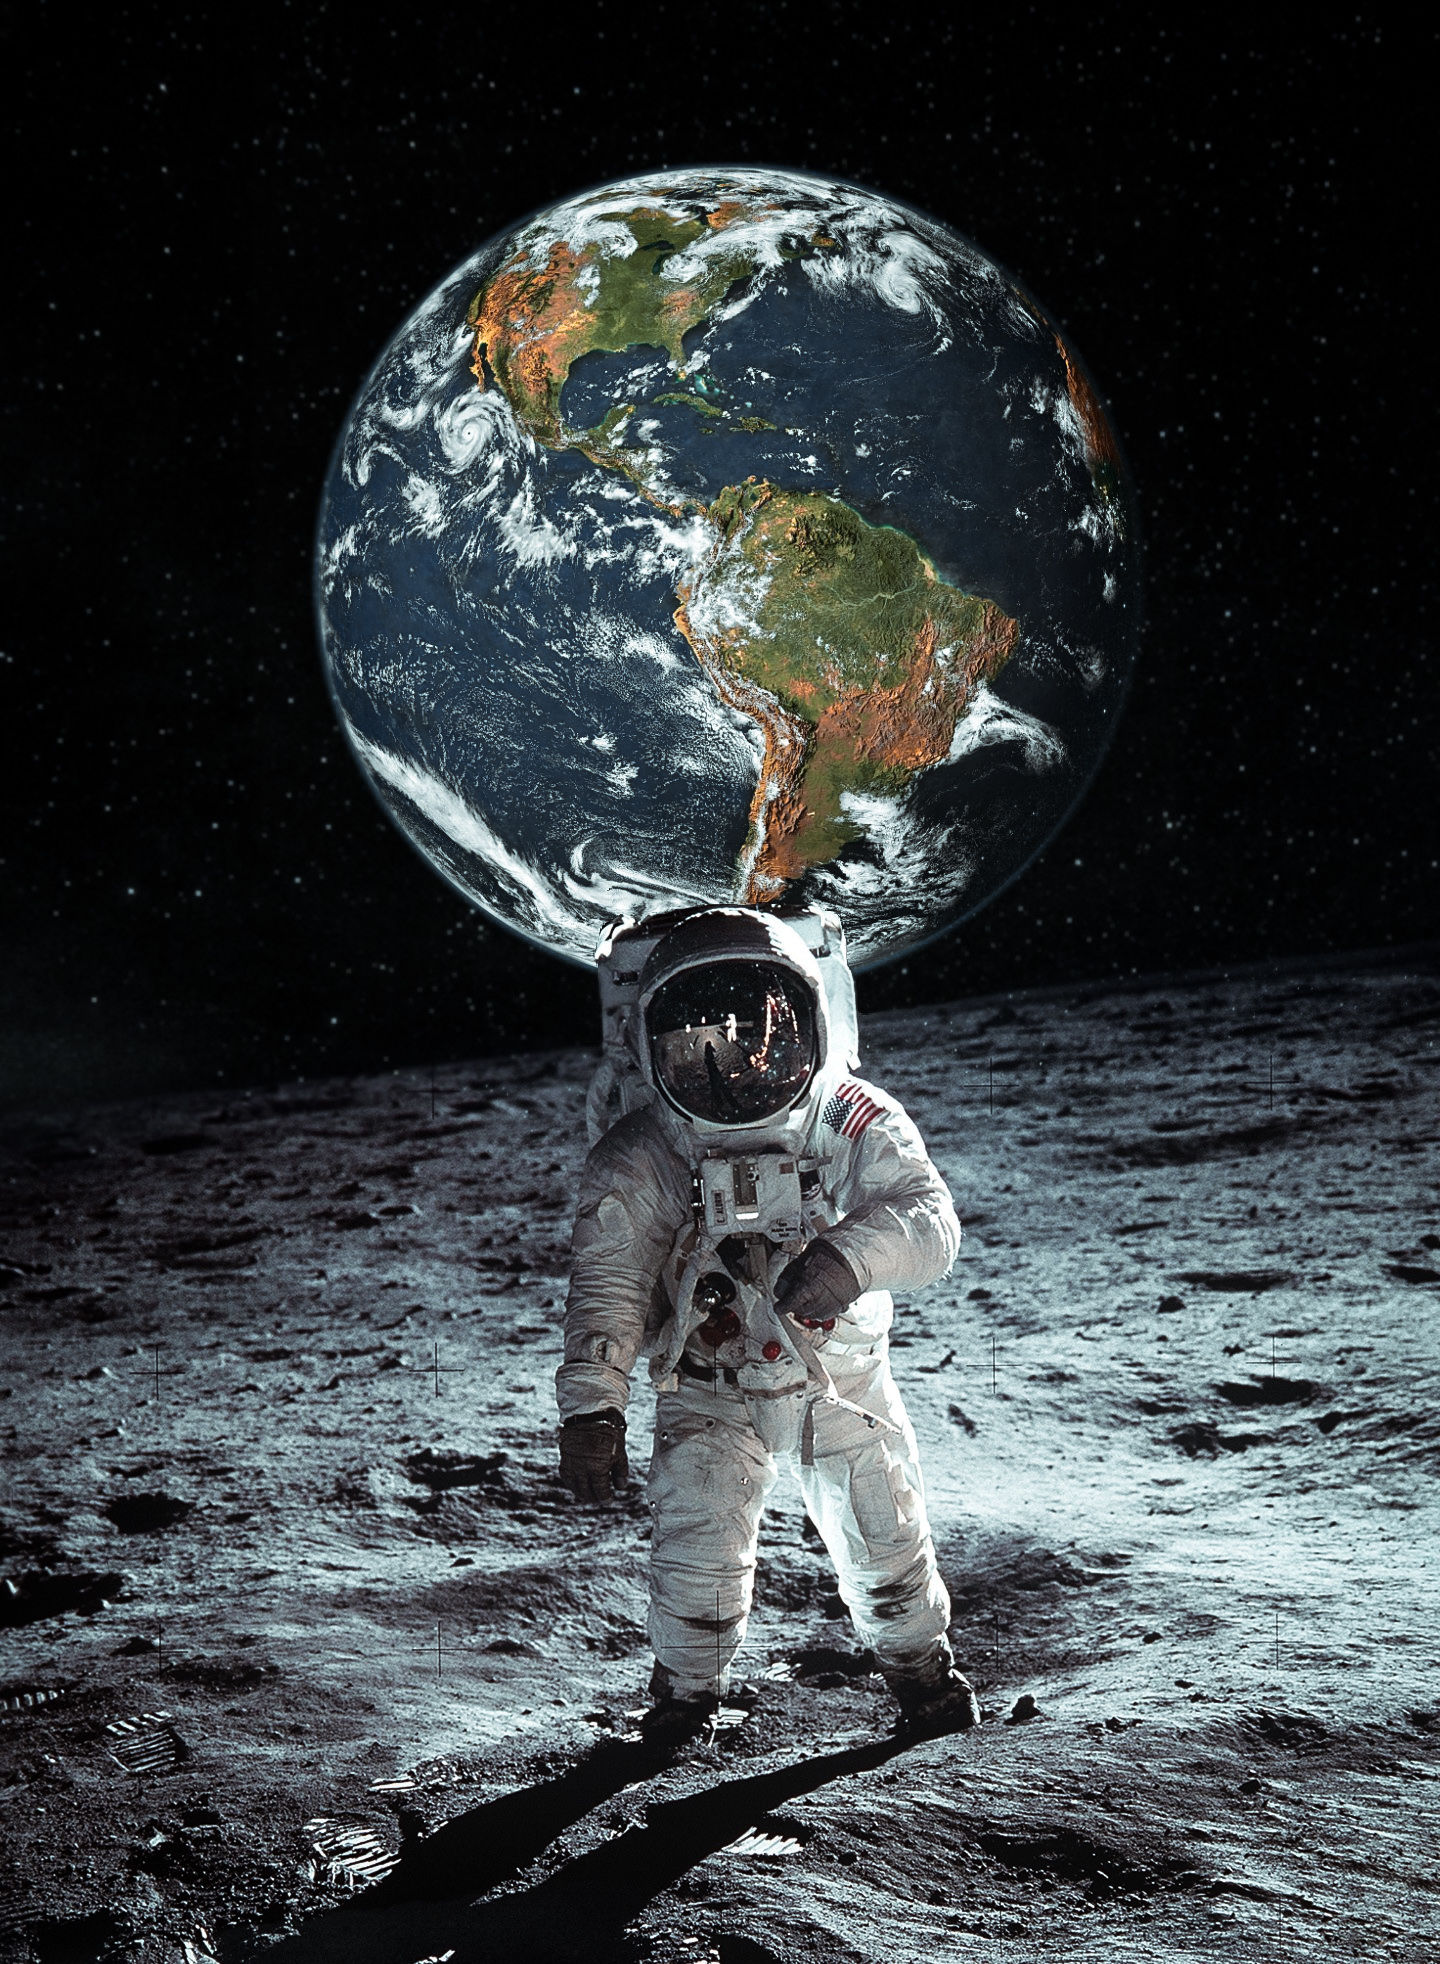 space, astronaut, space suit, space exploration, planet - space, planet earth, astronomy, space helmet, moon, futuristic, night, exploration, people, full length, star - space, nature, work helmet, sky, moon surface, shiny, digital composite, black background